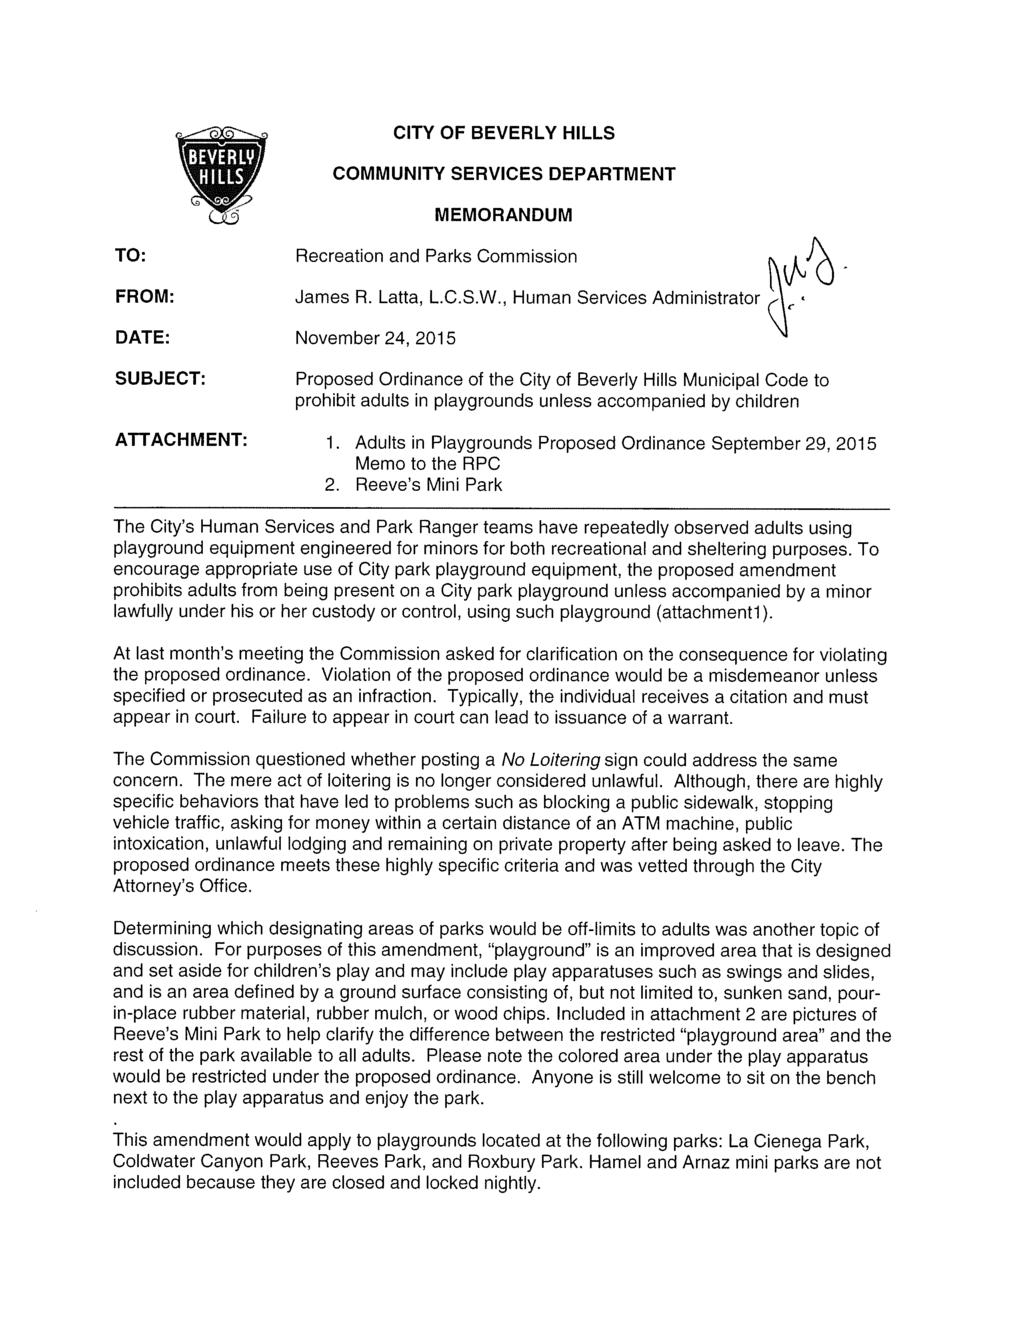 CITY OF BEVERLY HILLS COMMUNITY SERVICES DEPARTMENT MEMORANDUM TO: FROM: Recreation and Parks Commission James R. Latta, LC.S.W.